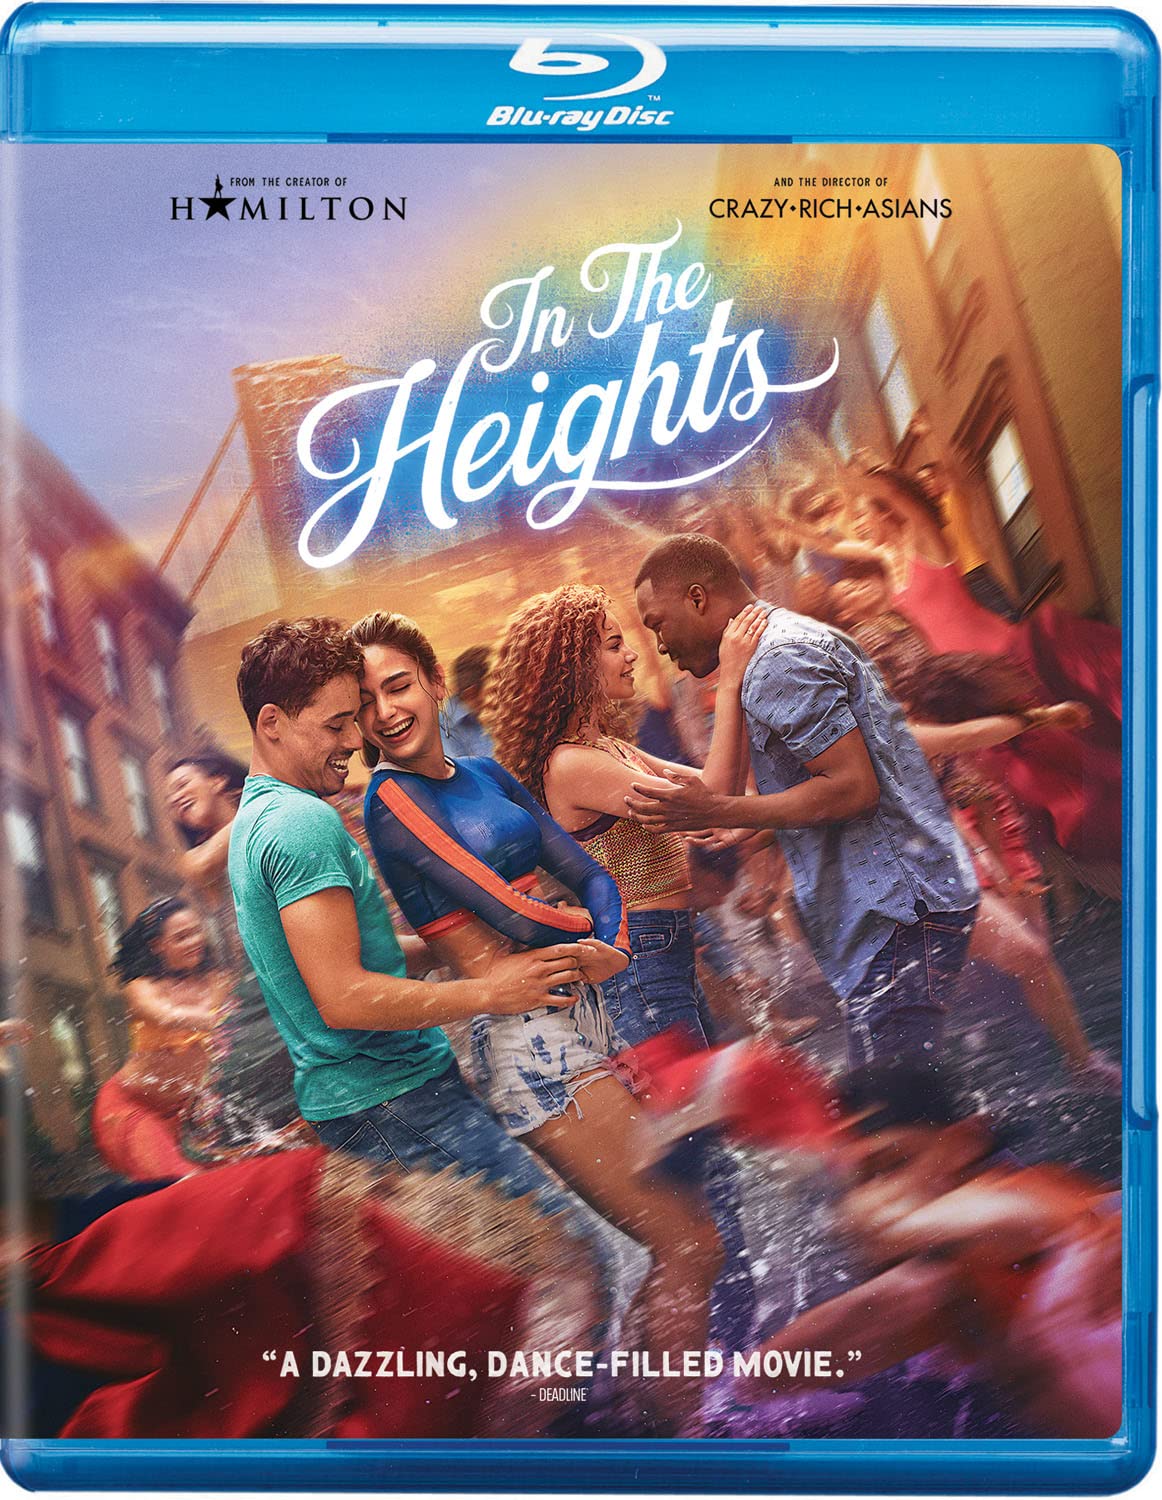 In The Heights - Blu-ray [ 2021 ]  - Musical Movies On Blu-ray - Movies On GRUV